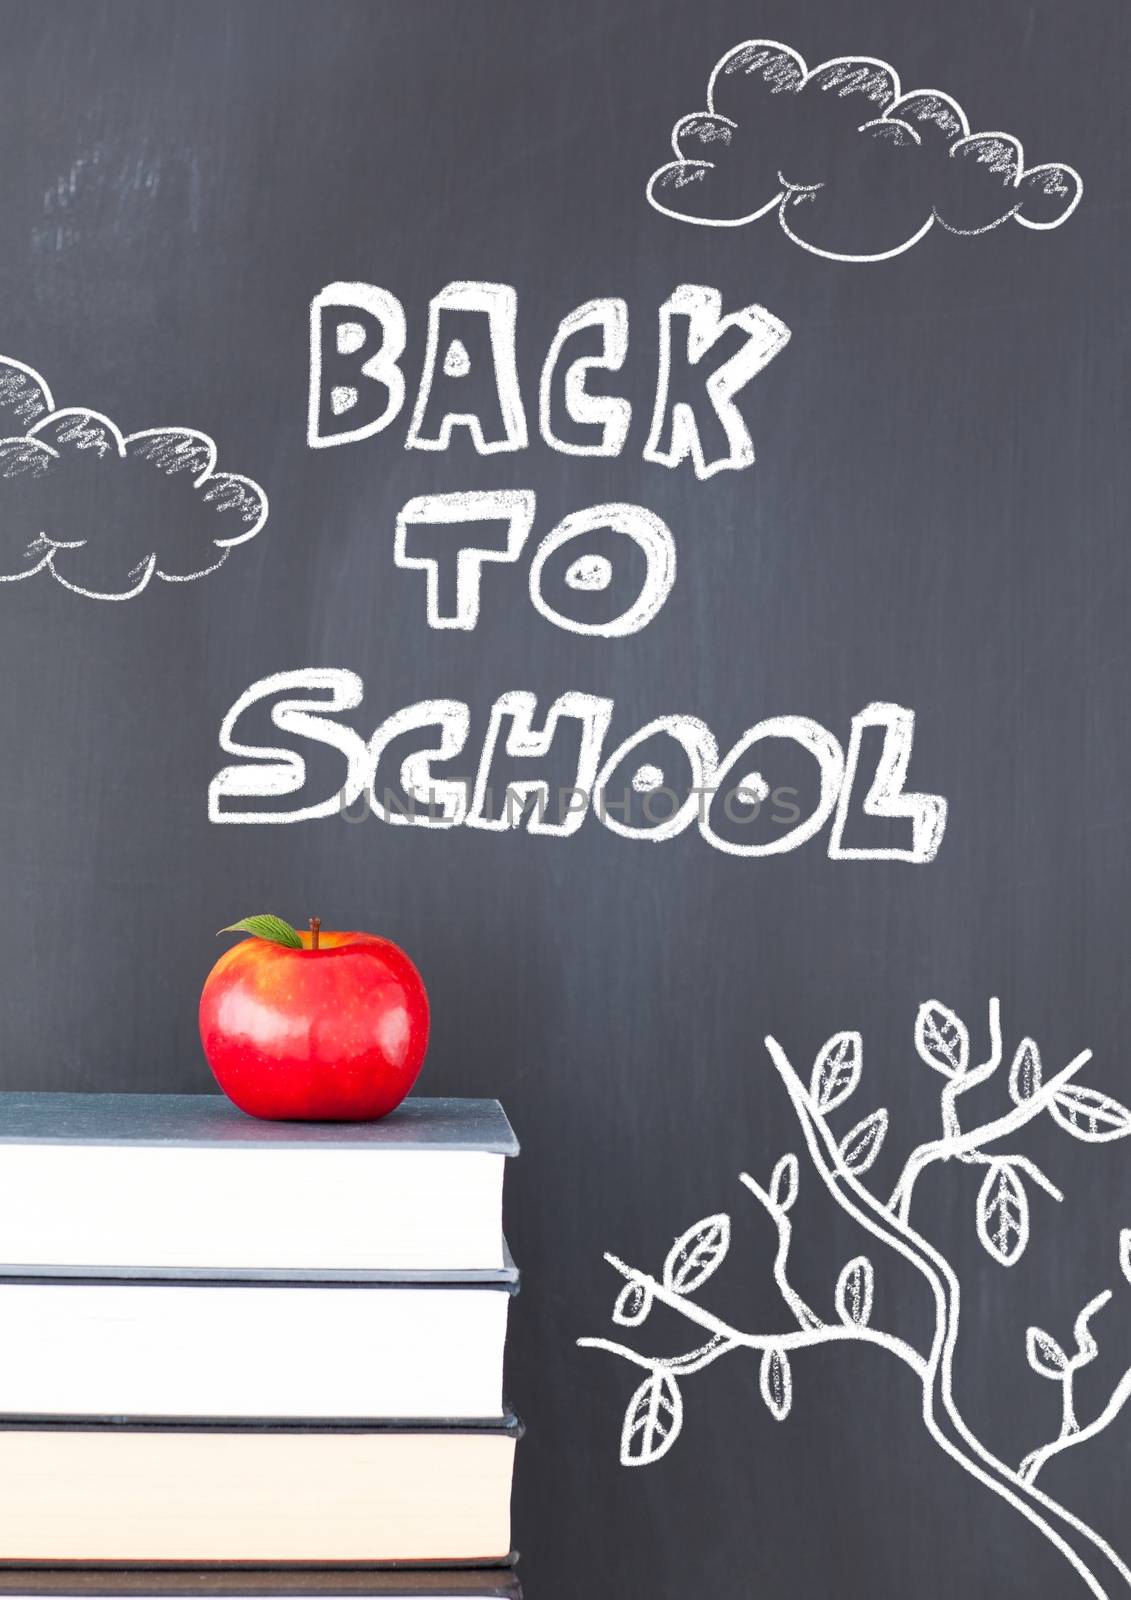 Digital composite of Back to school Education drawing on blackboard with apple